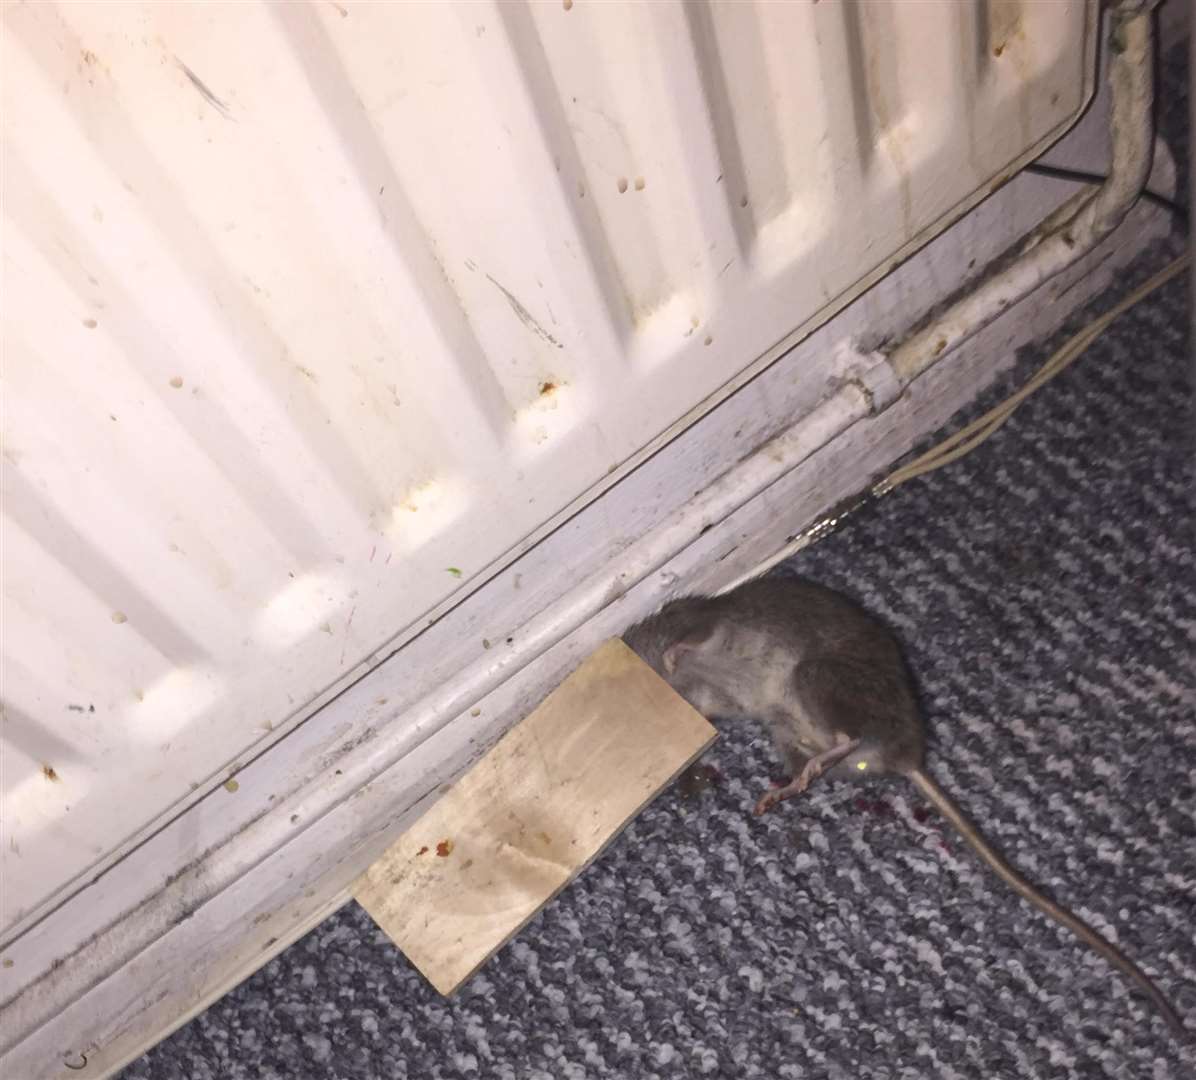 A dead rat in Amy Woodcock’s home